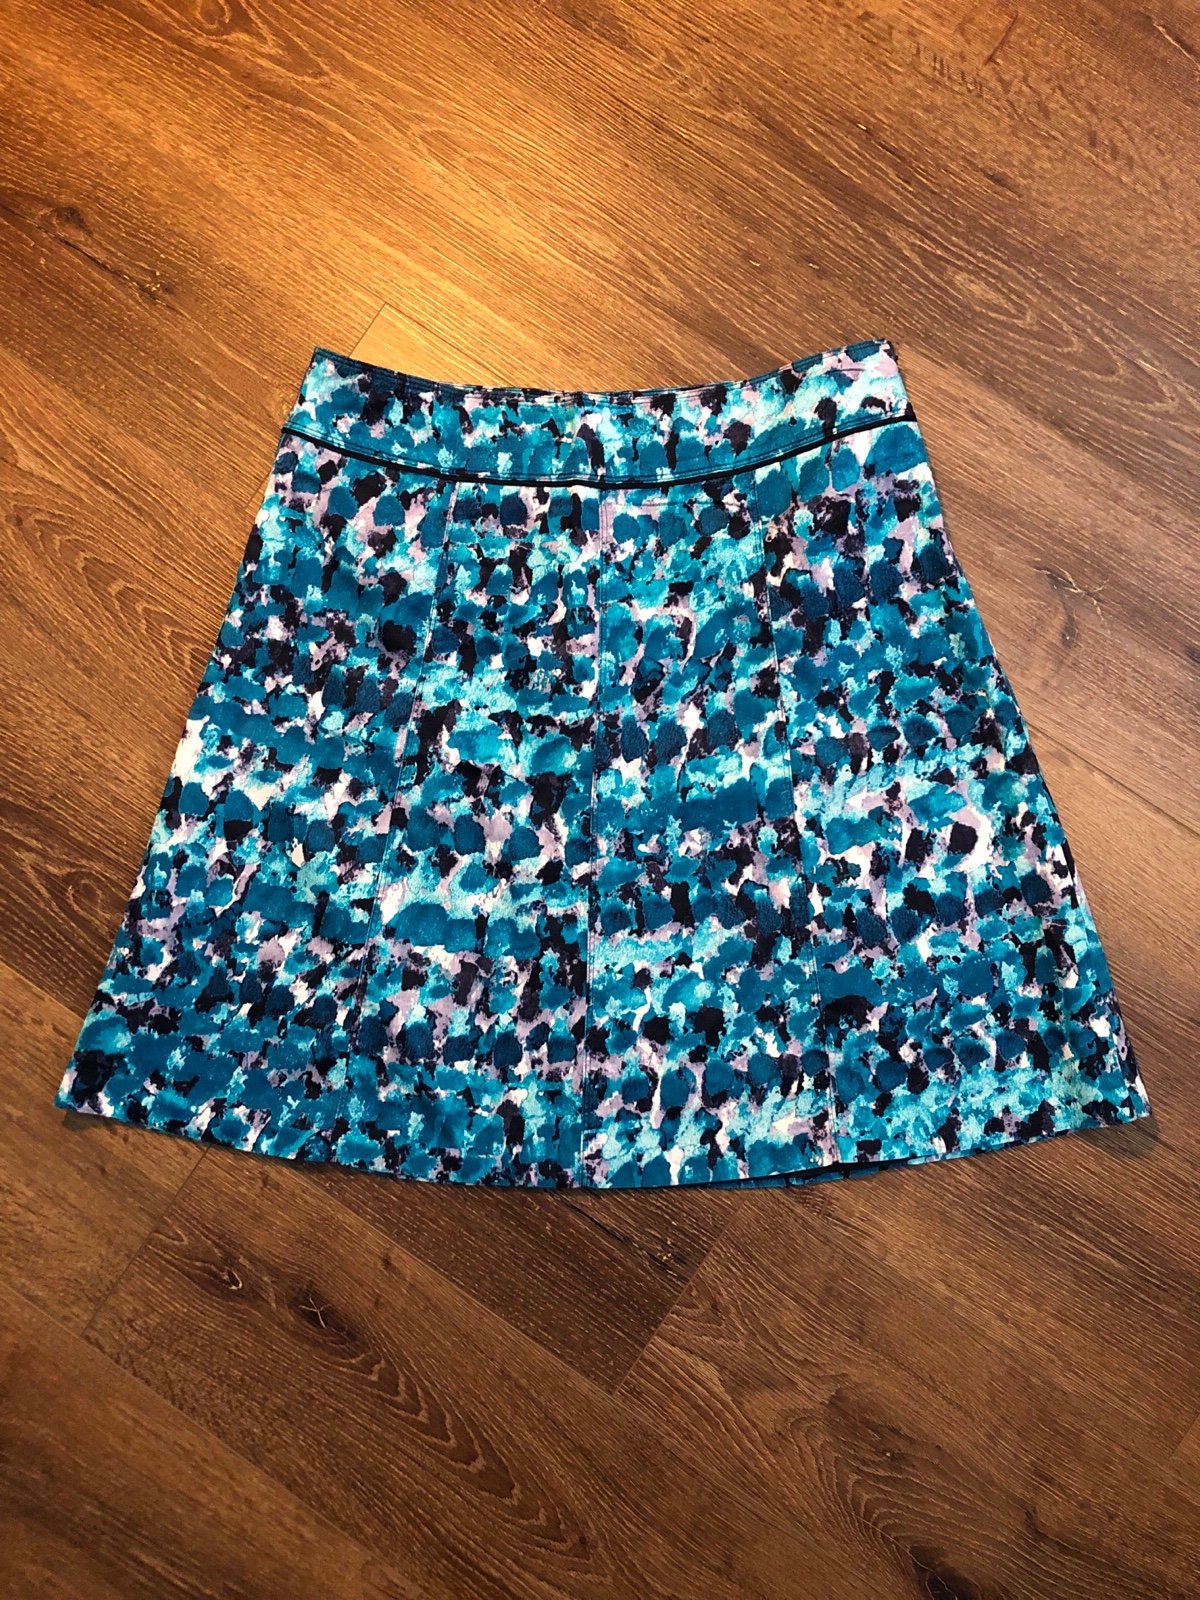 Personality Ann Taylor Blue Floral Flared Lined Skirt S